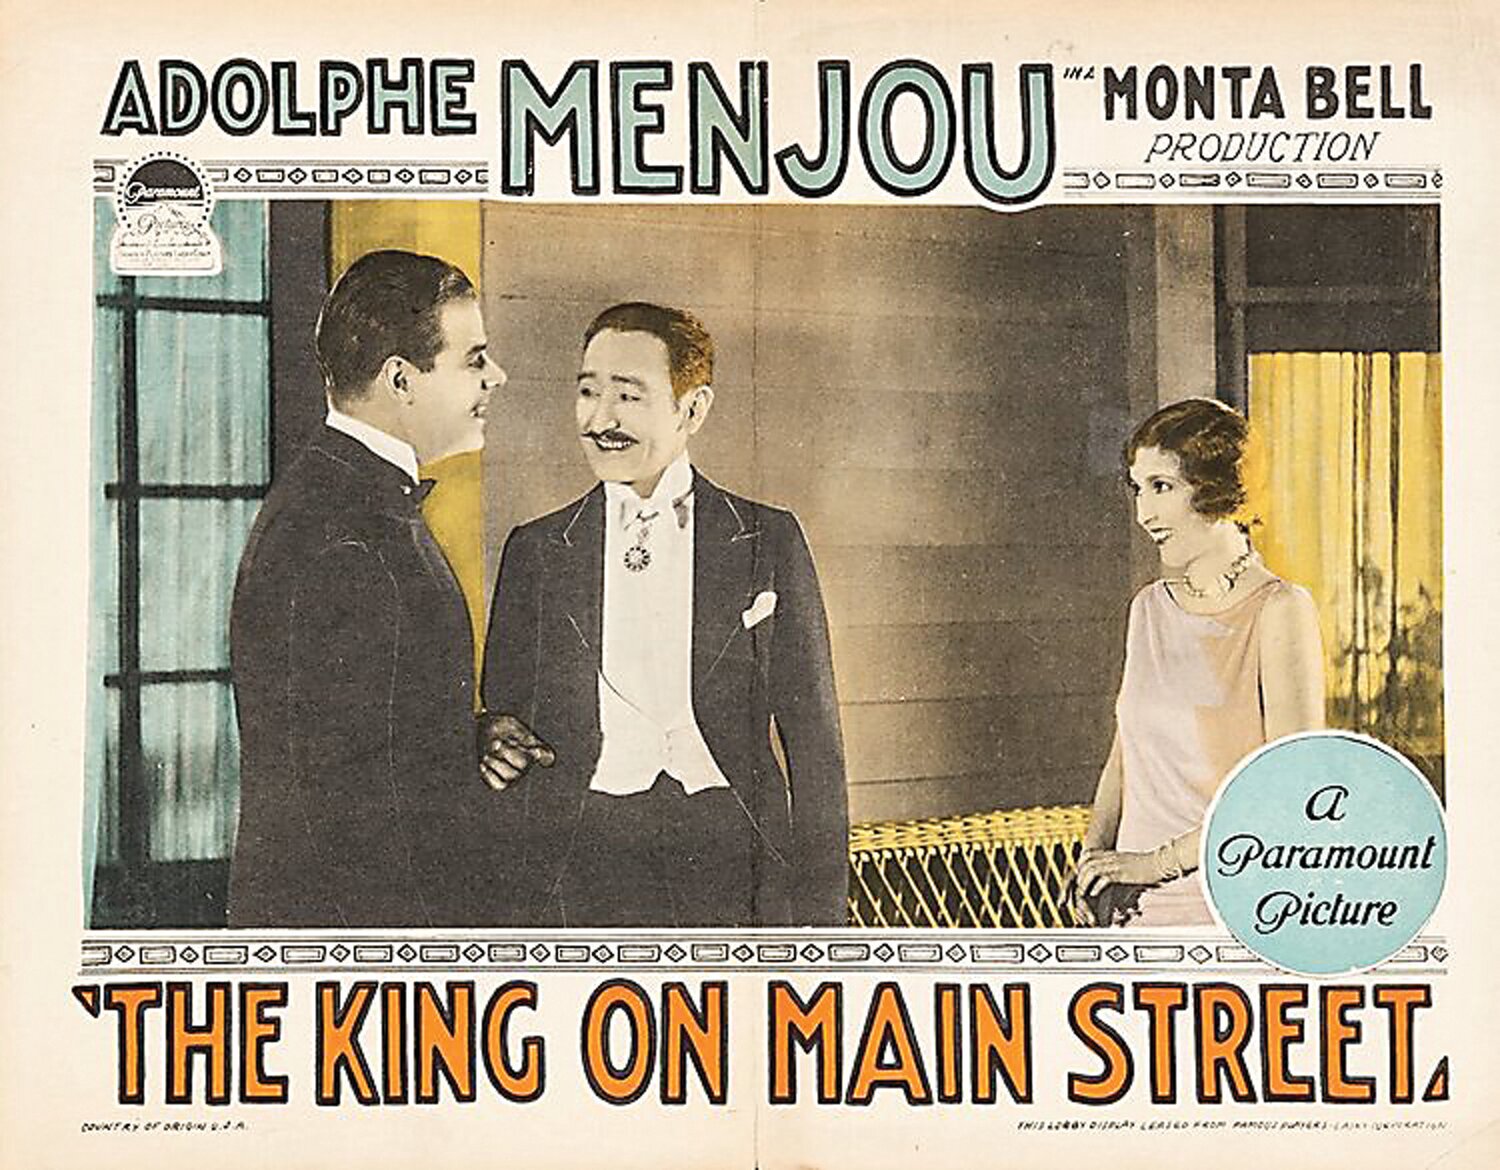 “The King on Main Street,” advertised on A Paramount Picture poster, will be screened along with live pipe organ improvisation at Glen Foerd.